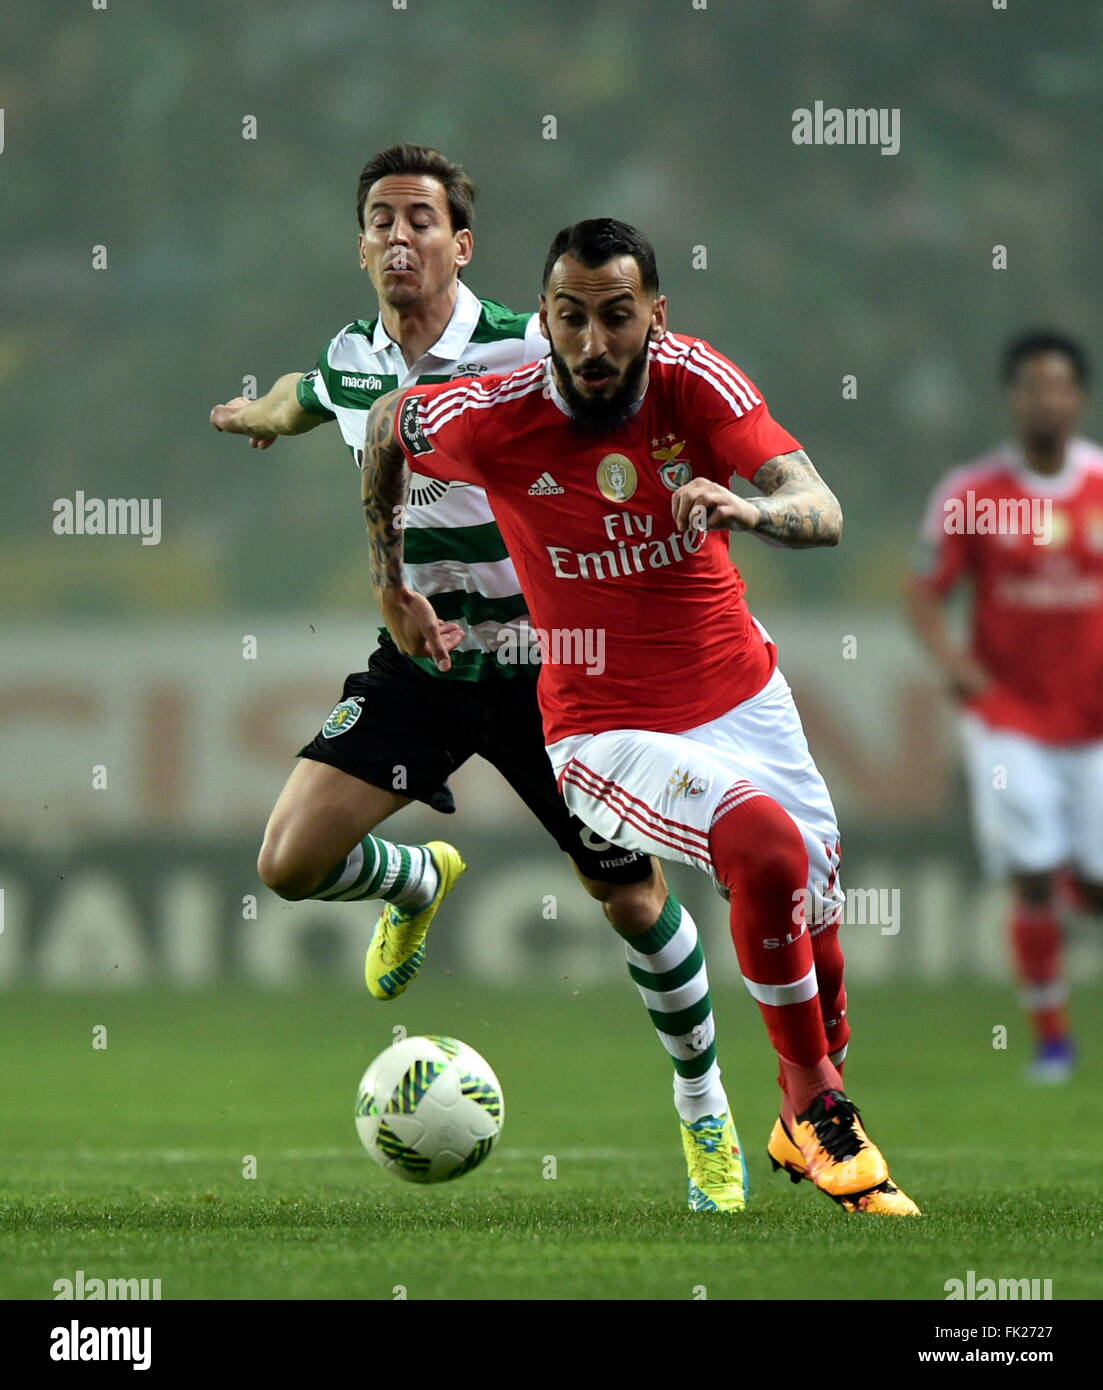 Lisbon. 5th Mar, 2016. Sporting's Joao Pereira (L) vies the ball with Benfica's Mitroglou during the Portuguese league football match between Sporting CP and SL Benfica at the Jose Alvalade stadium in Lisbon on Mar. 5, 2016. Sporting lost 0-1. © Zhang Liyun/Xinhua/Alamy Live News Stock Photo